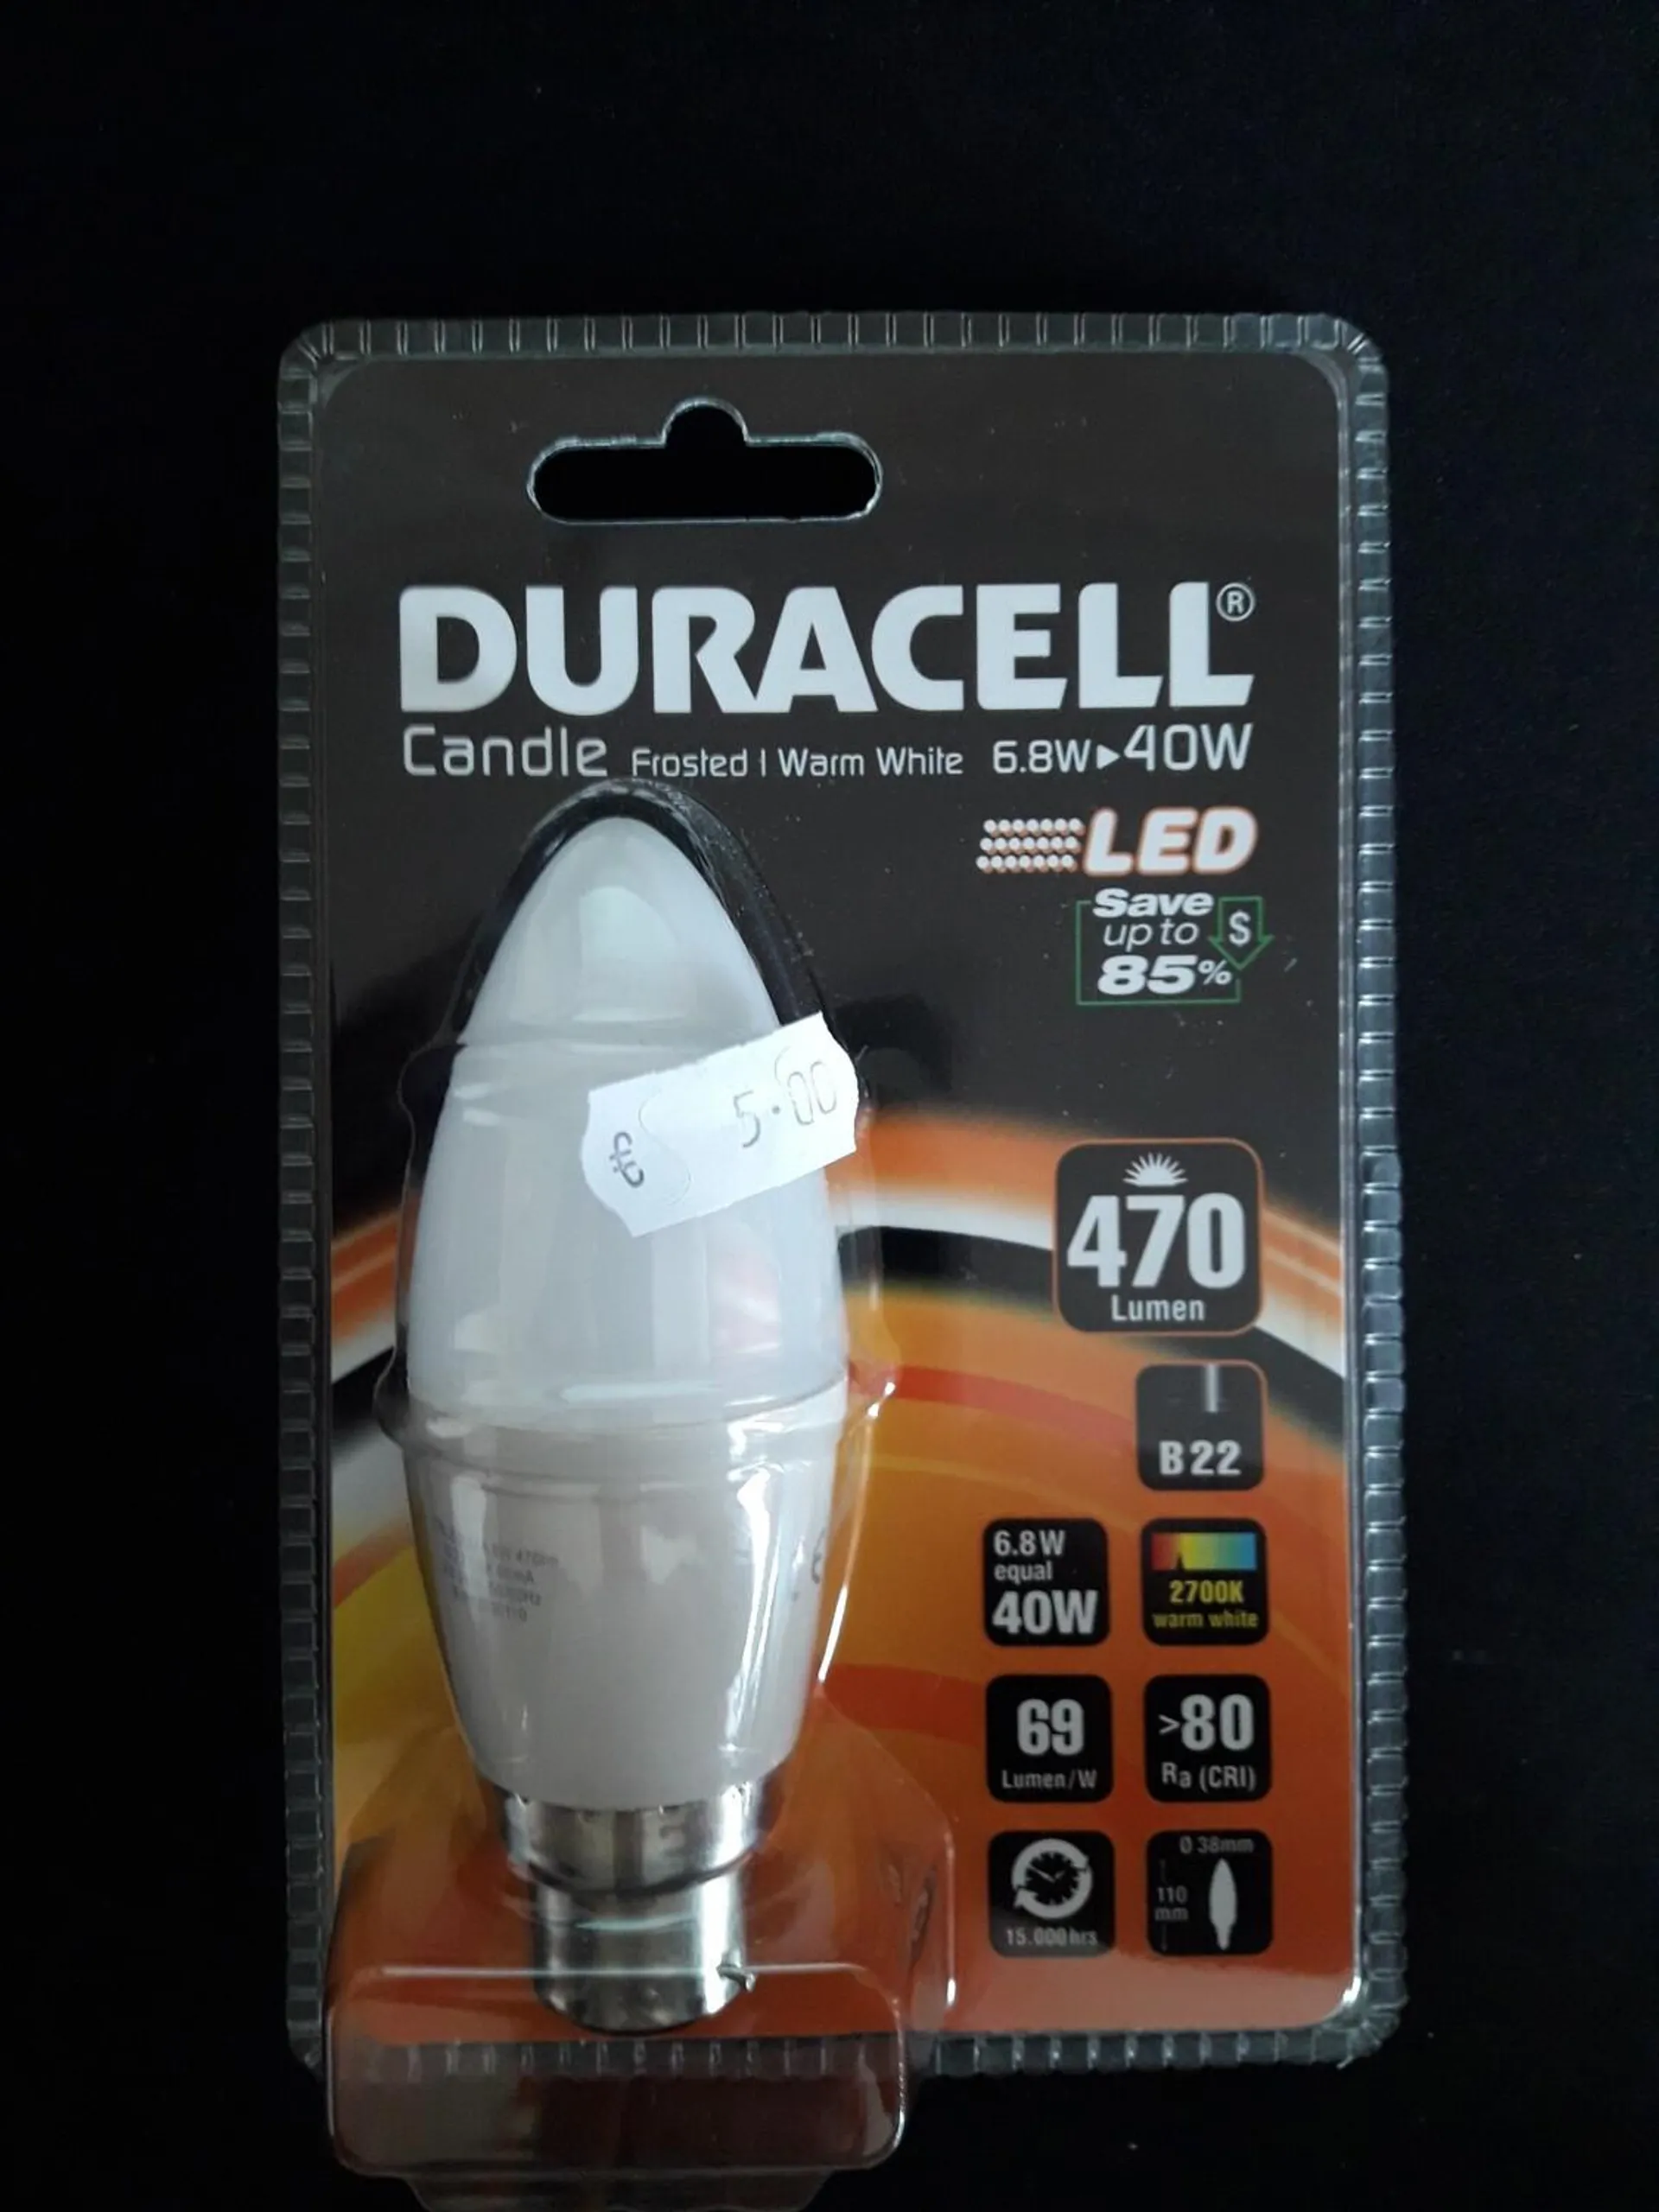 Duracell LED Candle 6.8w Frosted BC / B22 Bulb